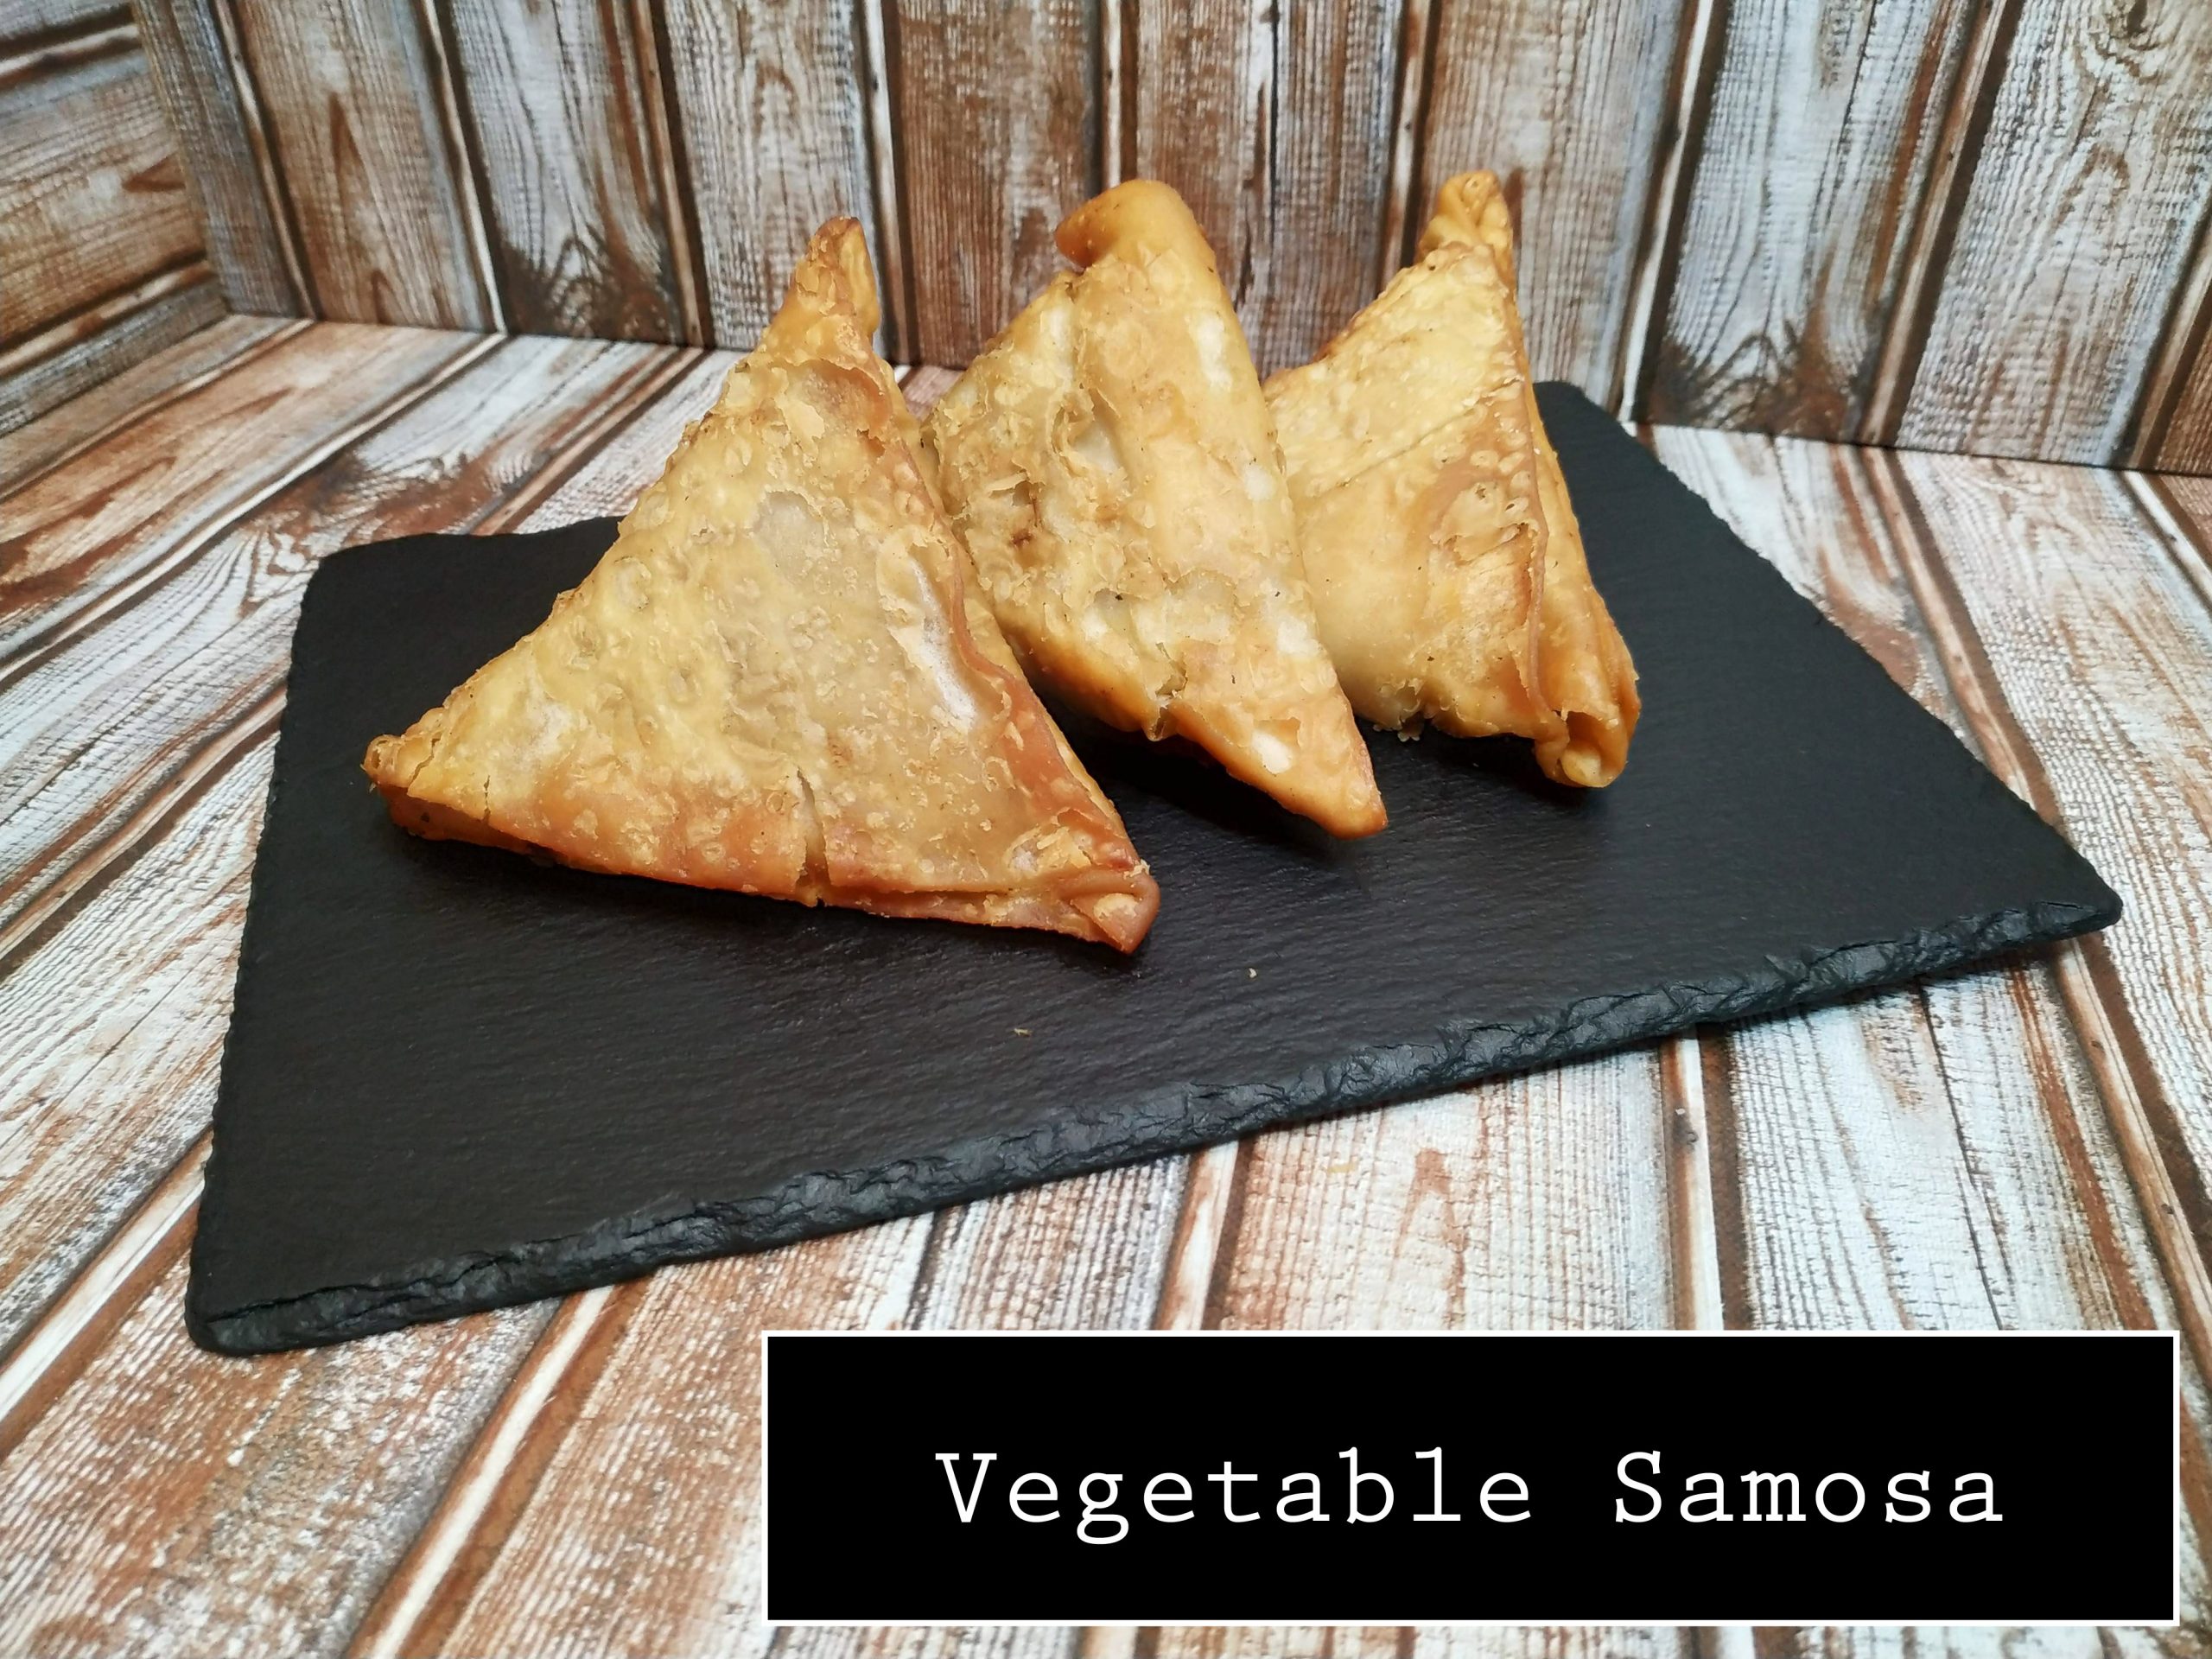 Vegetable Samosa by Sandwich in the Square